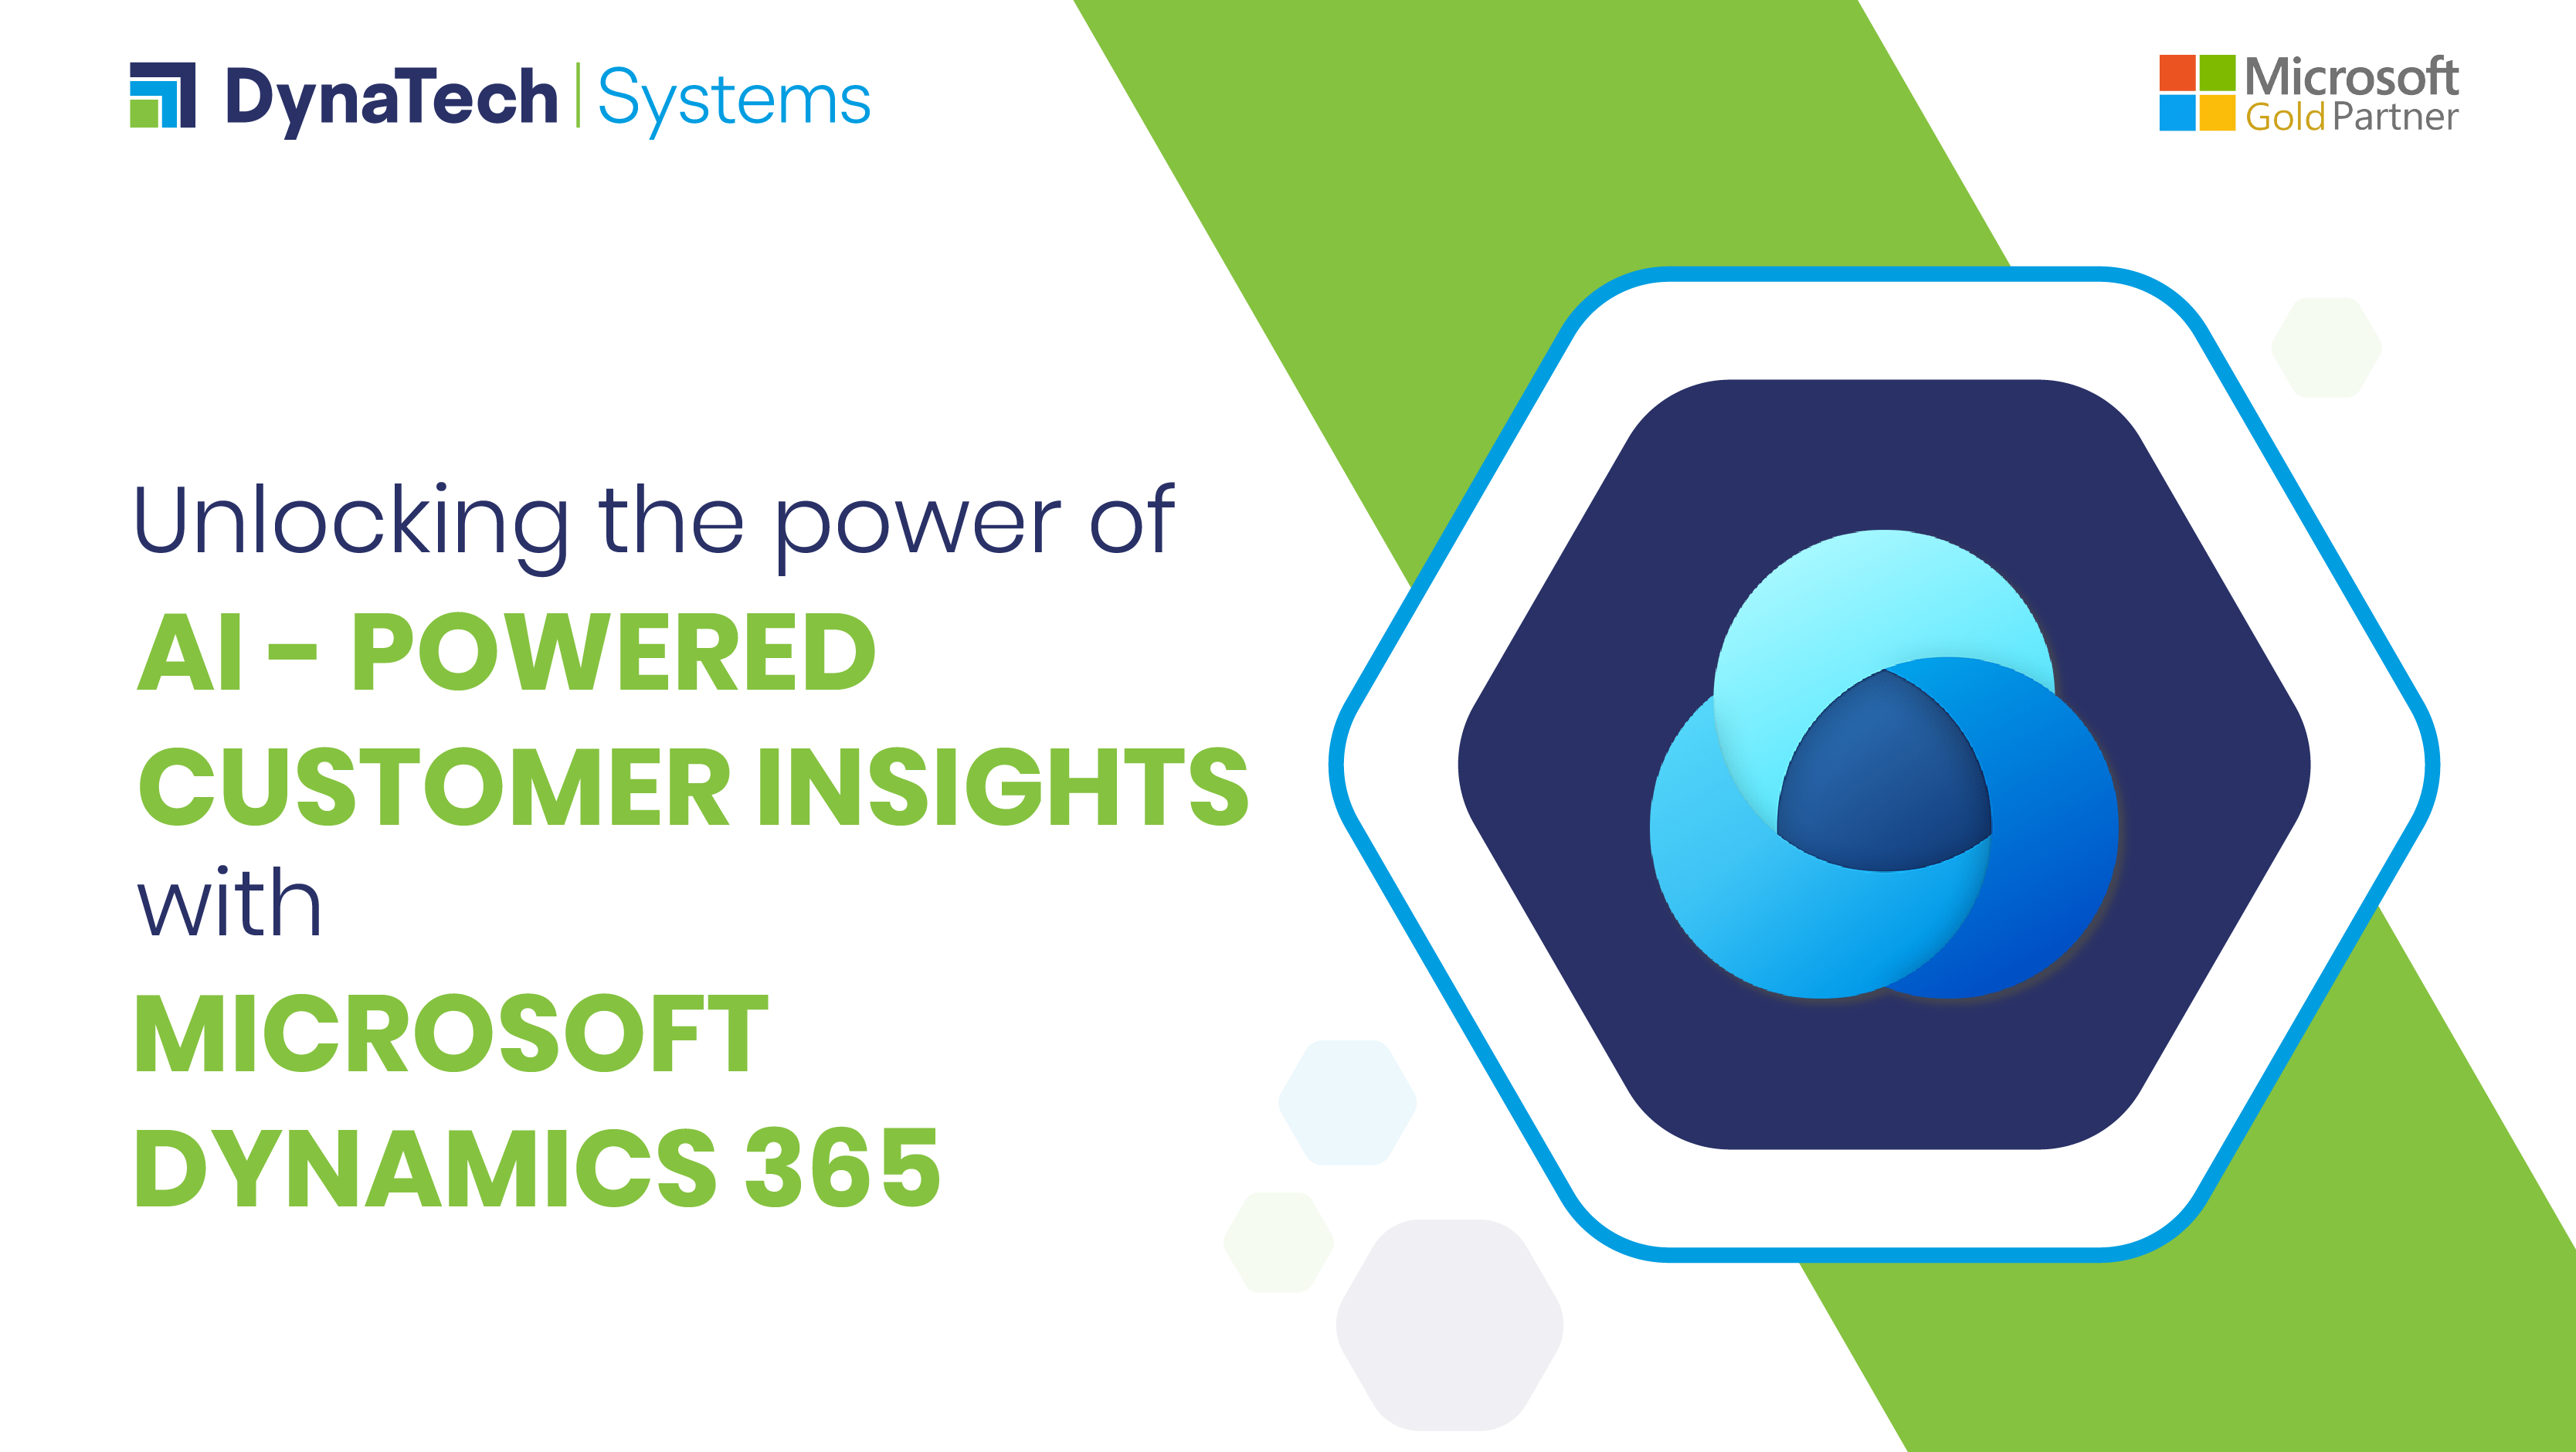 Unlocking the power of AI-Powered Customer Insights with Microsoft Dynamics 365